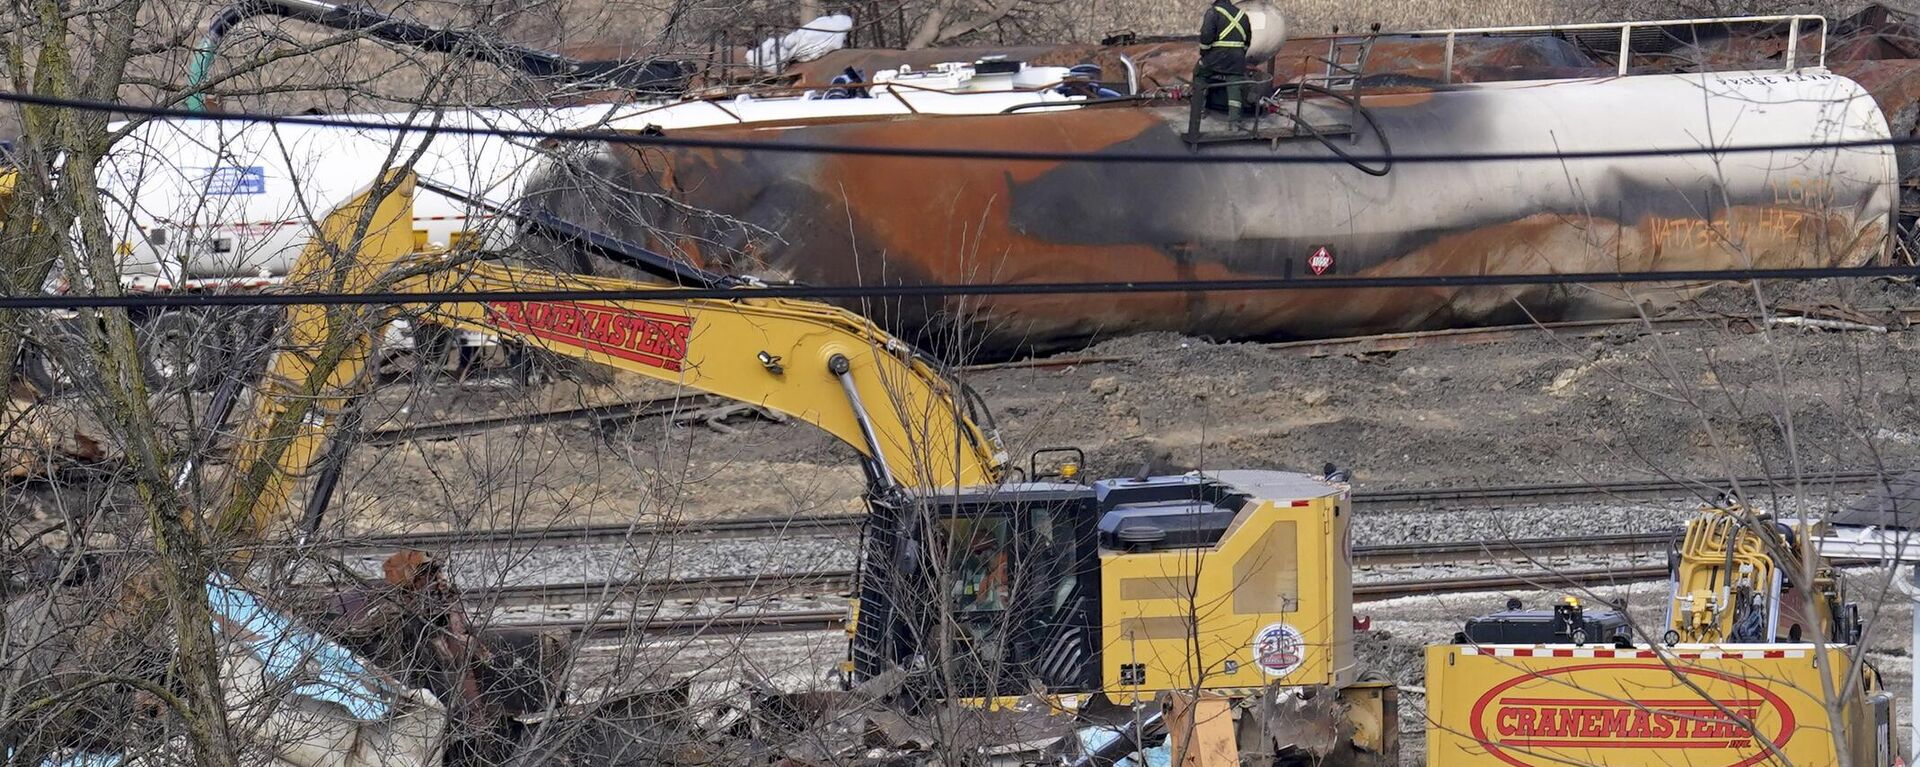 Workers continue to clean up remaining tank cars, Tuesday, Feb. 21, 2023, in East Palestine, Ohio, following the Feb. 3 Norfolk Southern freight train derailment. - Sputnik International, 1920, 26.02.2023